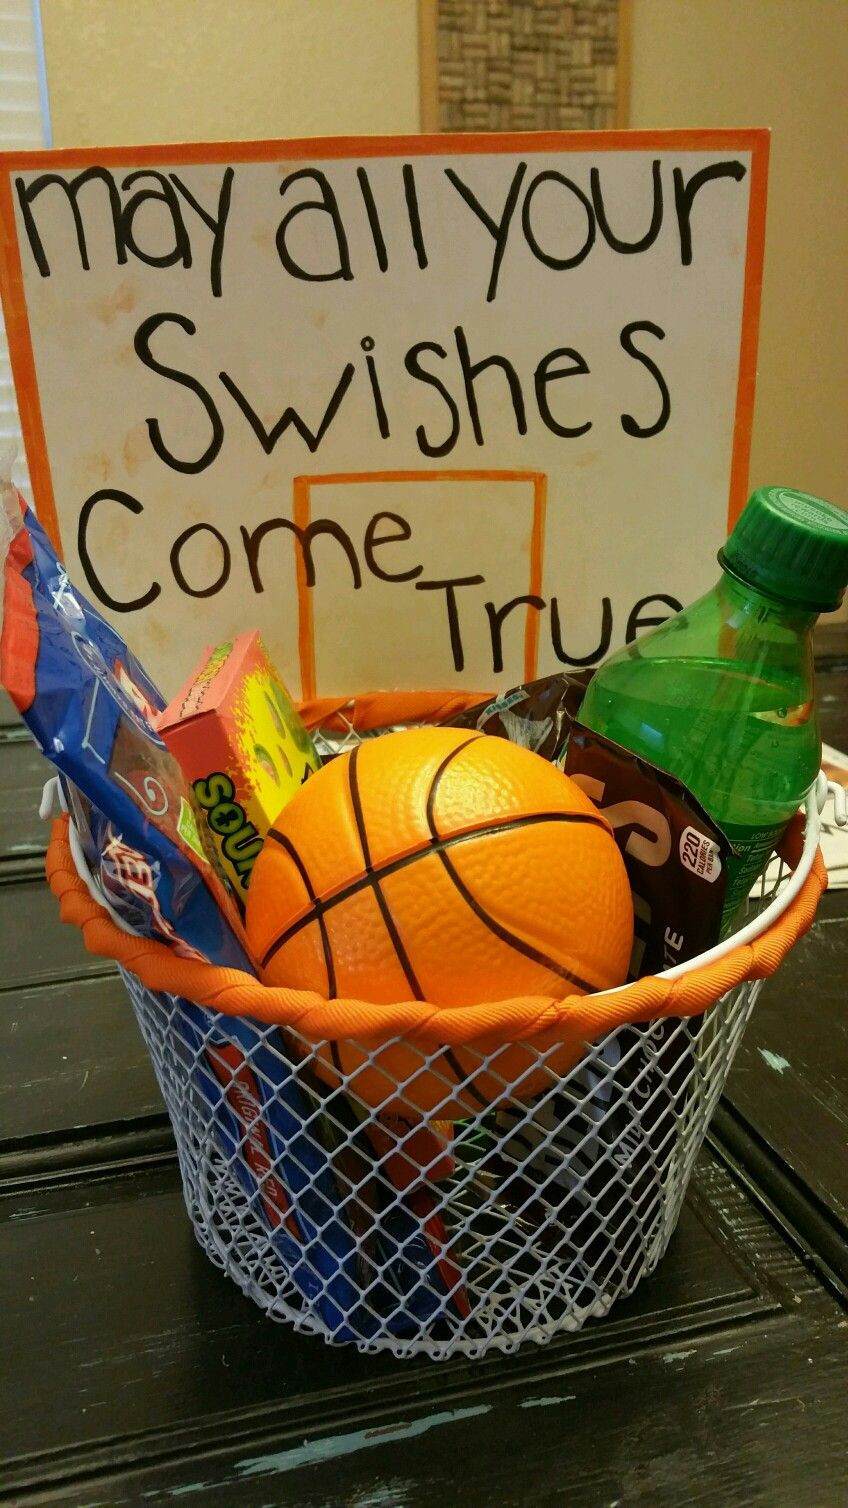 Basketball Gift Basket Ideas
 May all your swishes e true Basketball t basket We